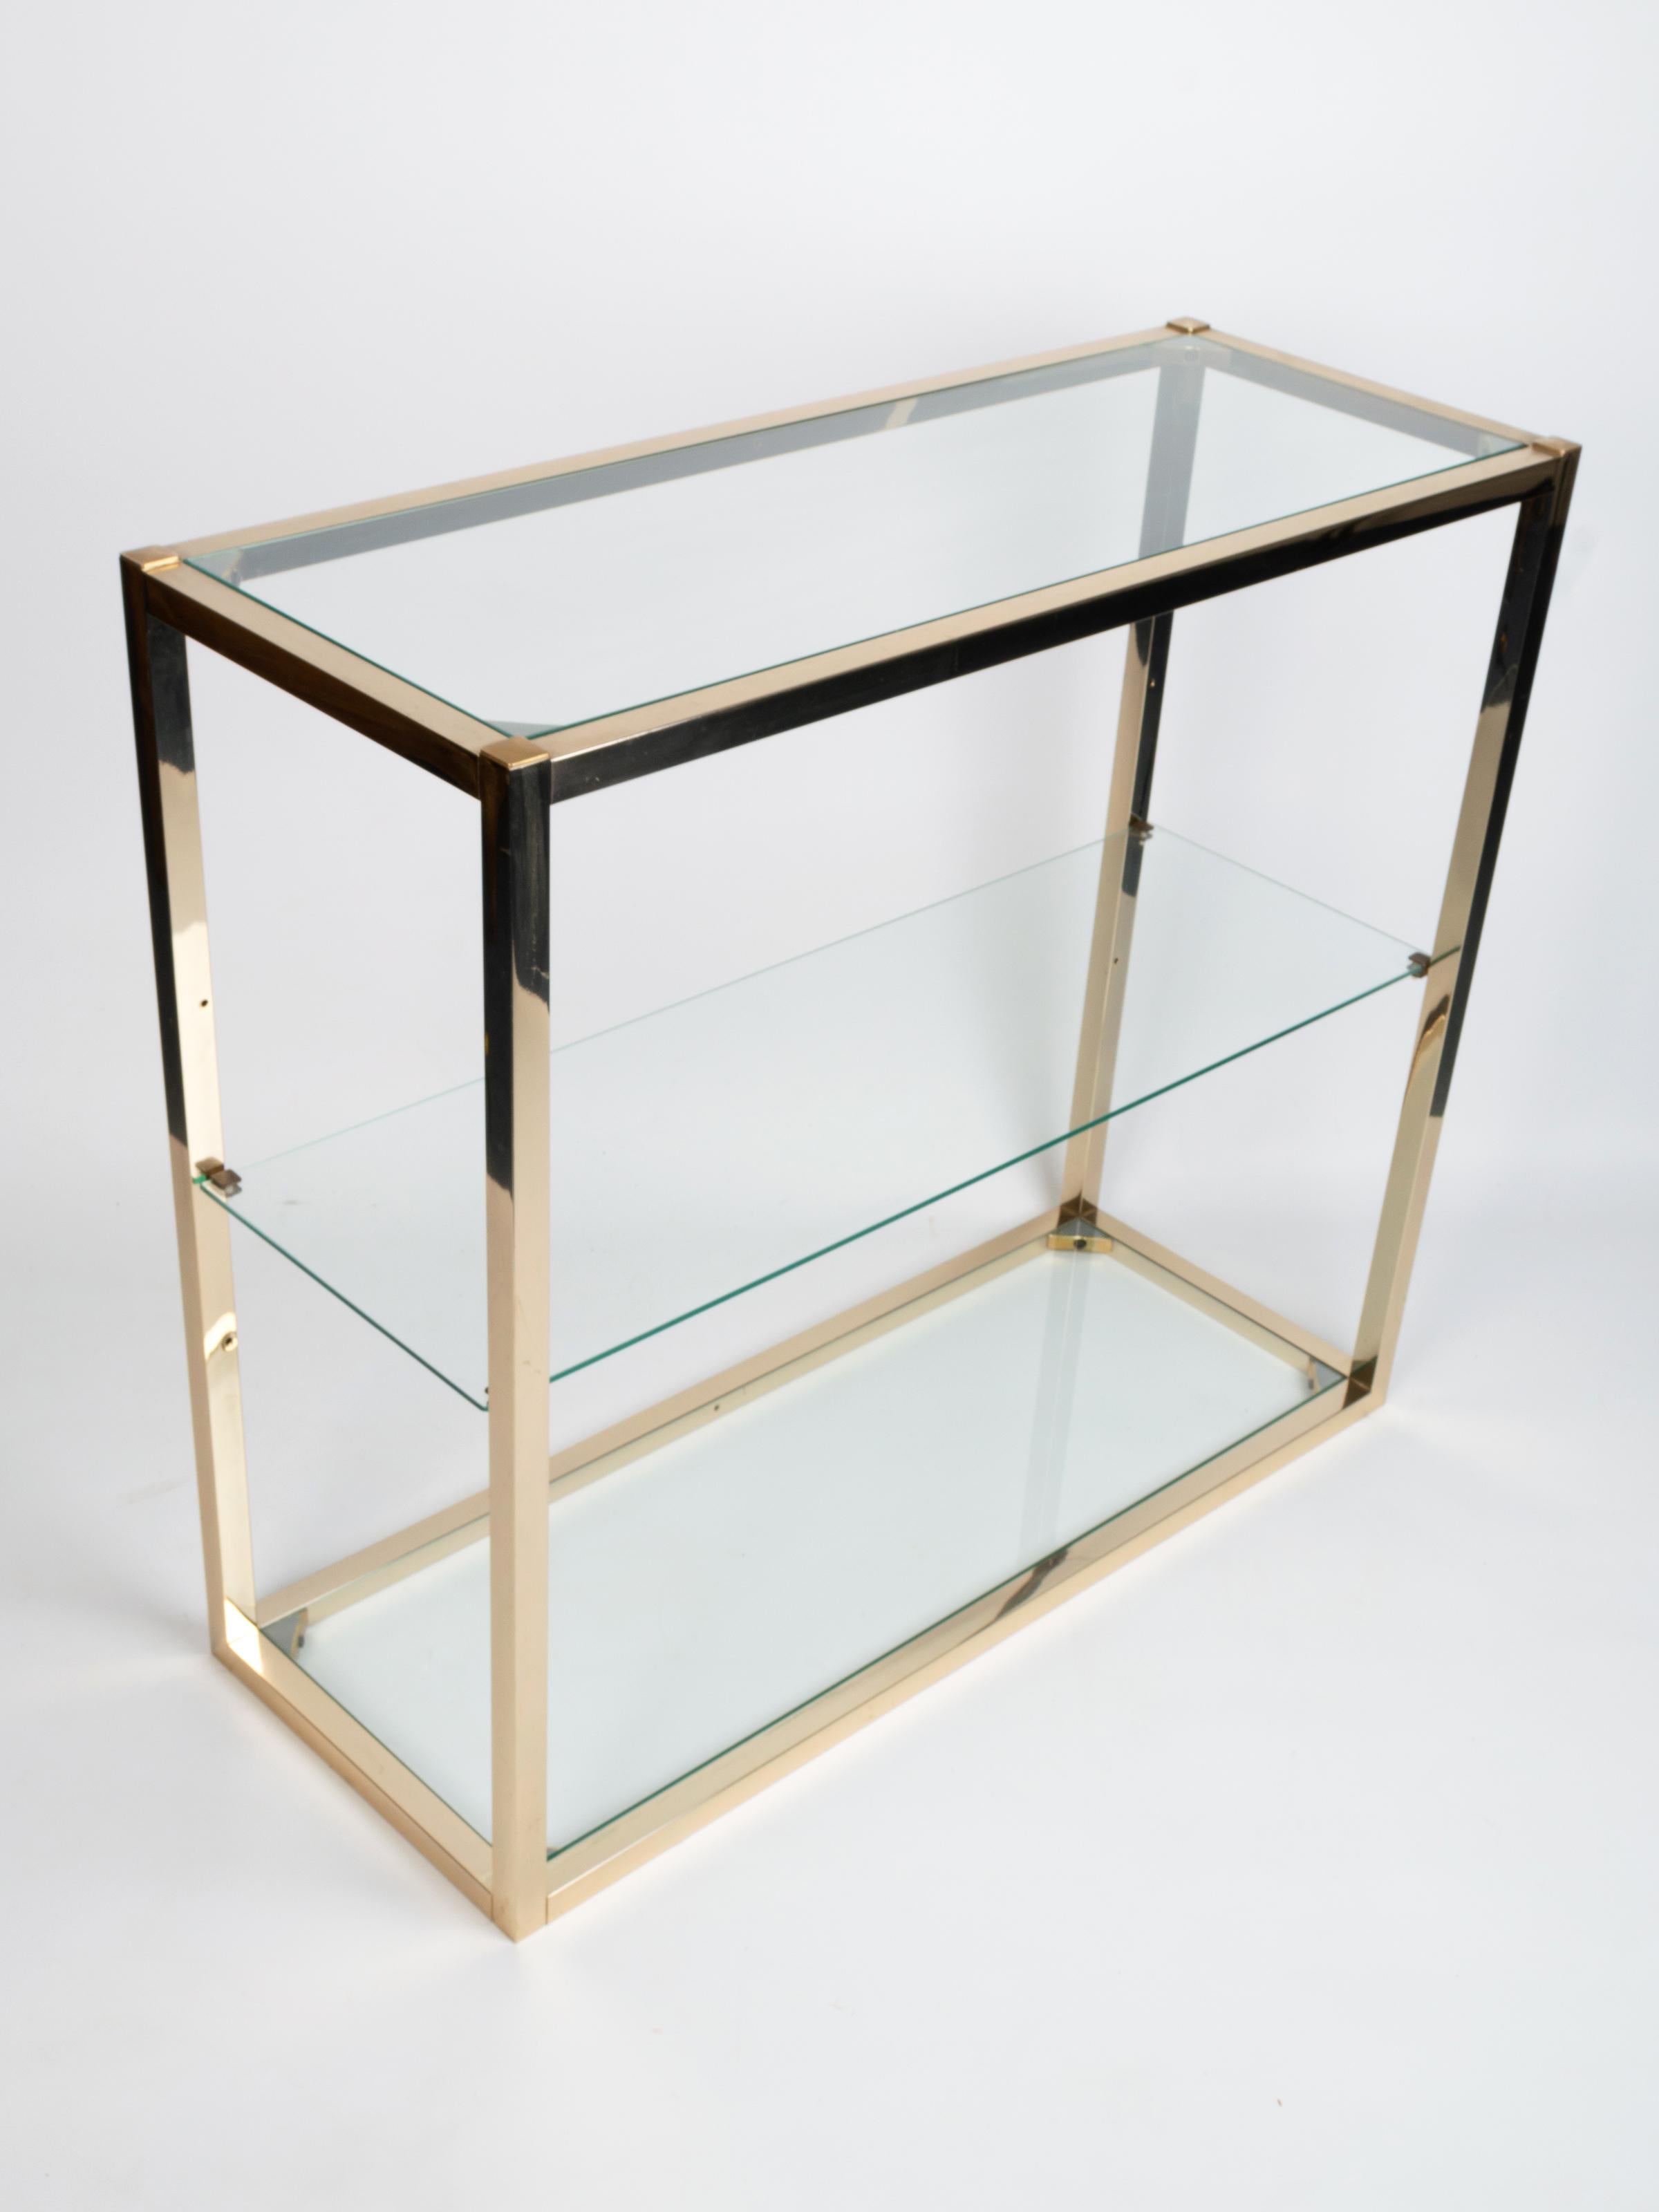 Romeo Rega Gold Plated Brass Etagere Shelving Console, Italy, C.1960 For Sale 4